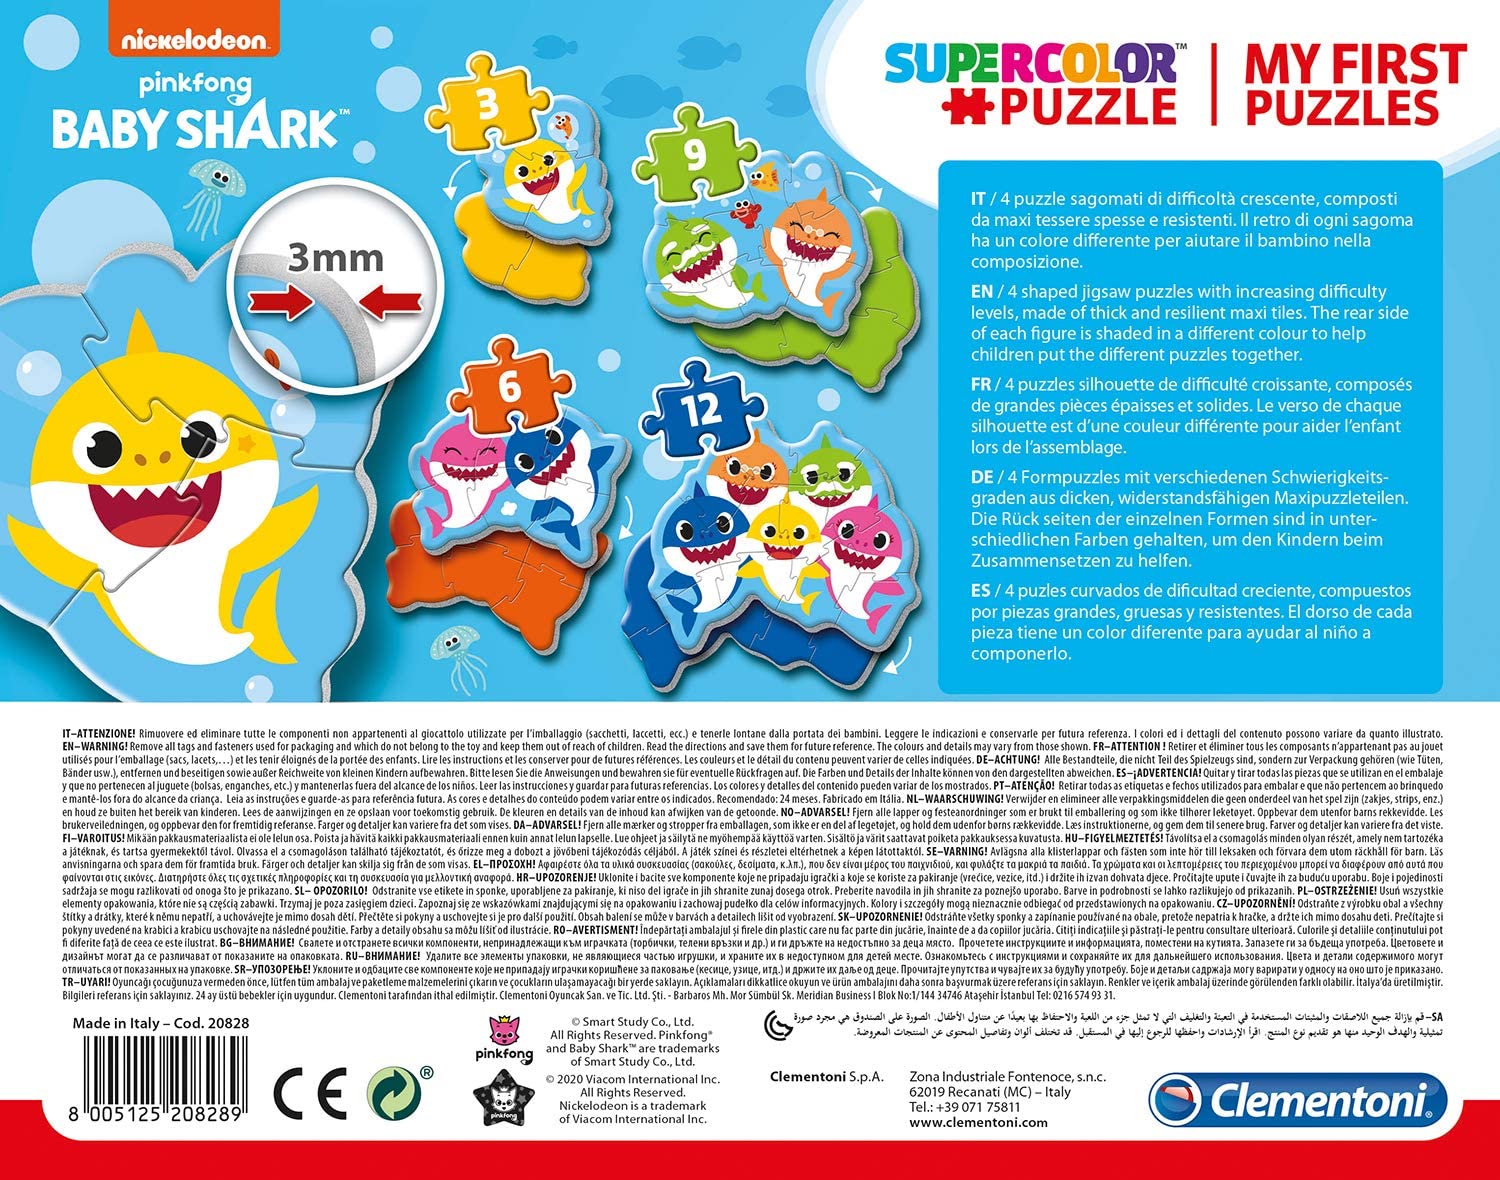 CLEMENTONI - My First Puzzles - 4 Shaped Puzzles - Baby Shark - Super Color